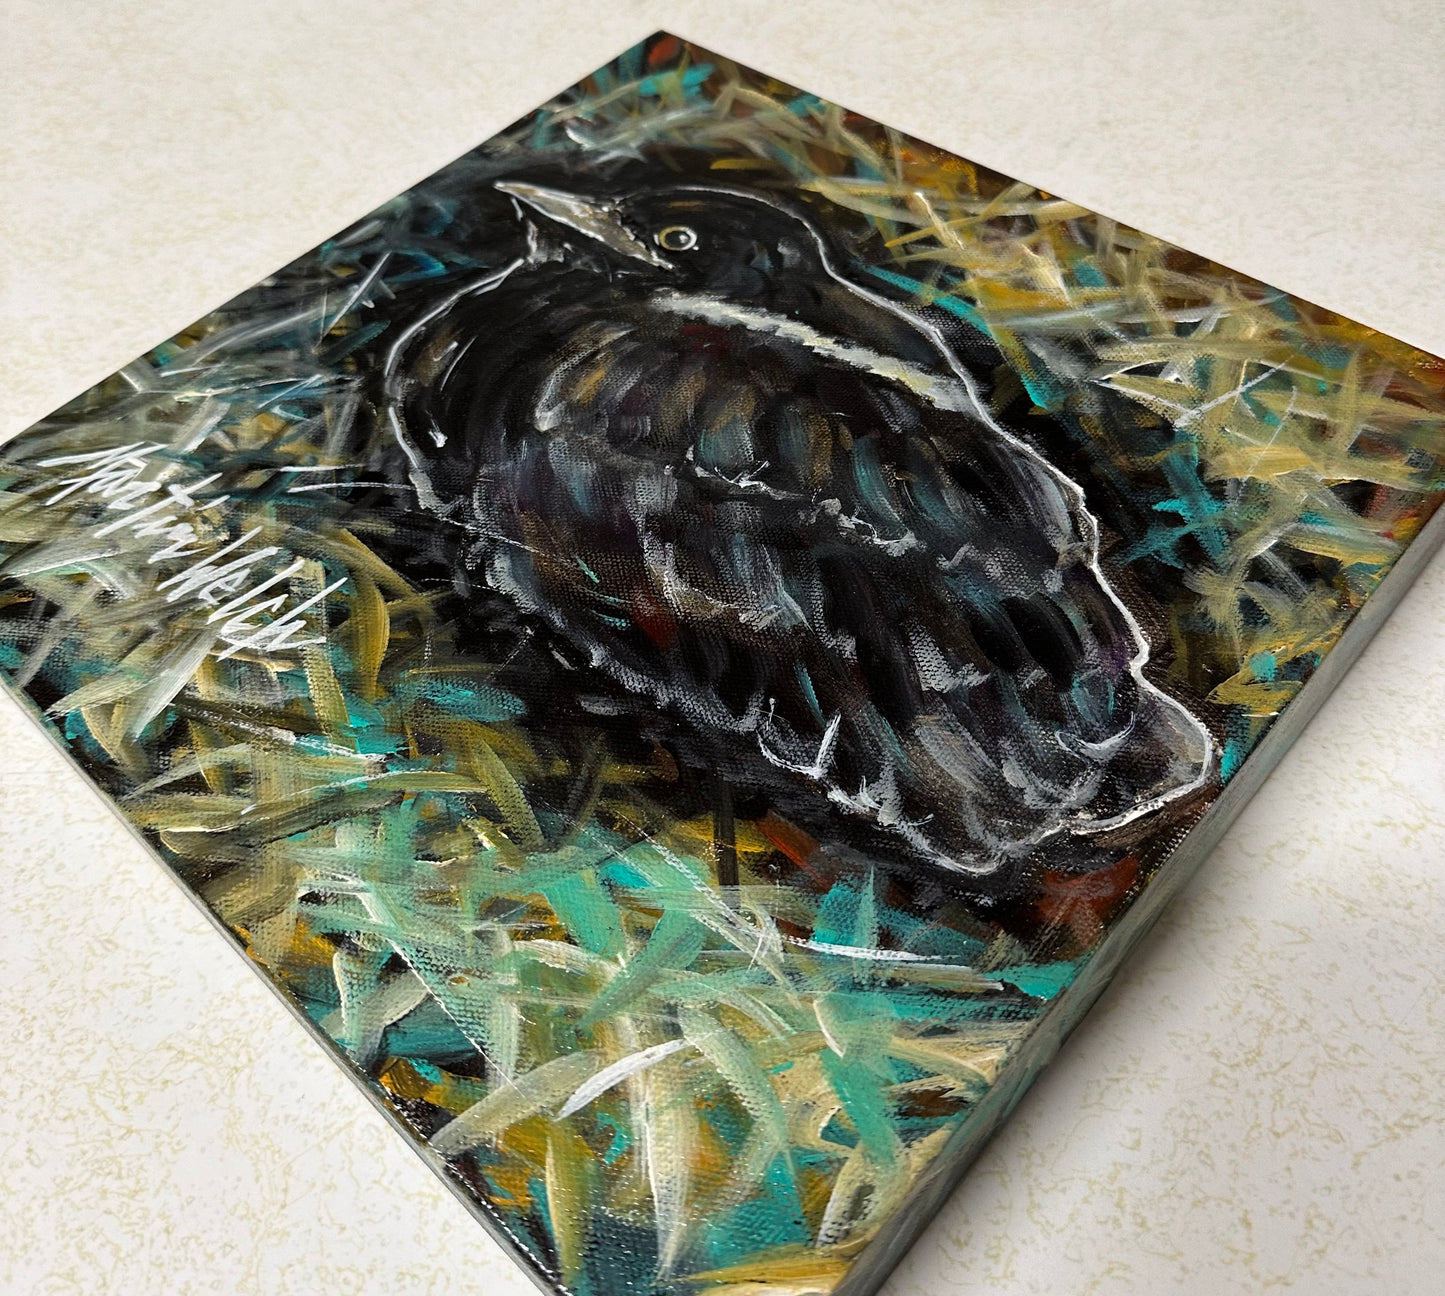 "Nesting" Baby Crow Original Painting 12"x12" by Martin Welch